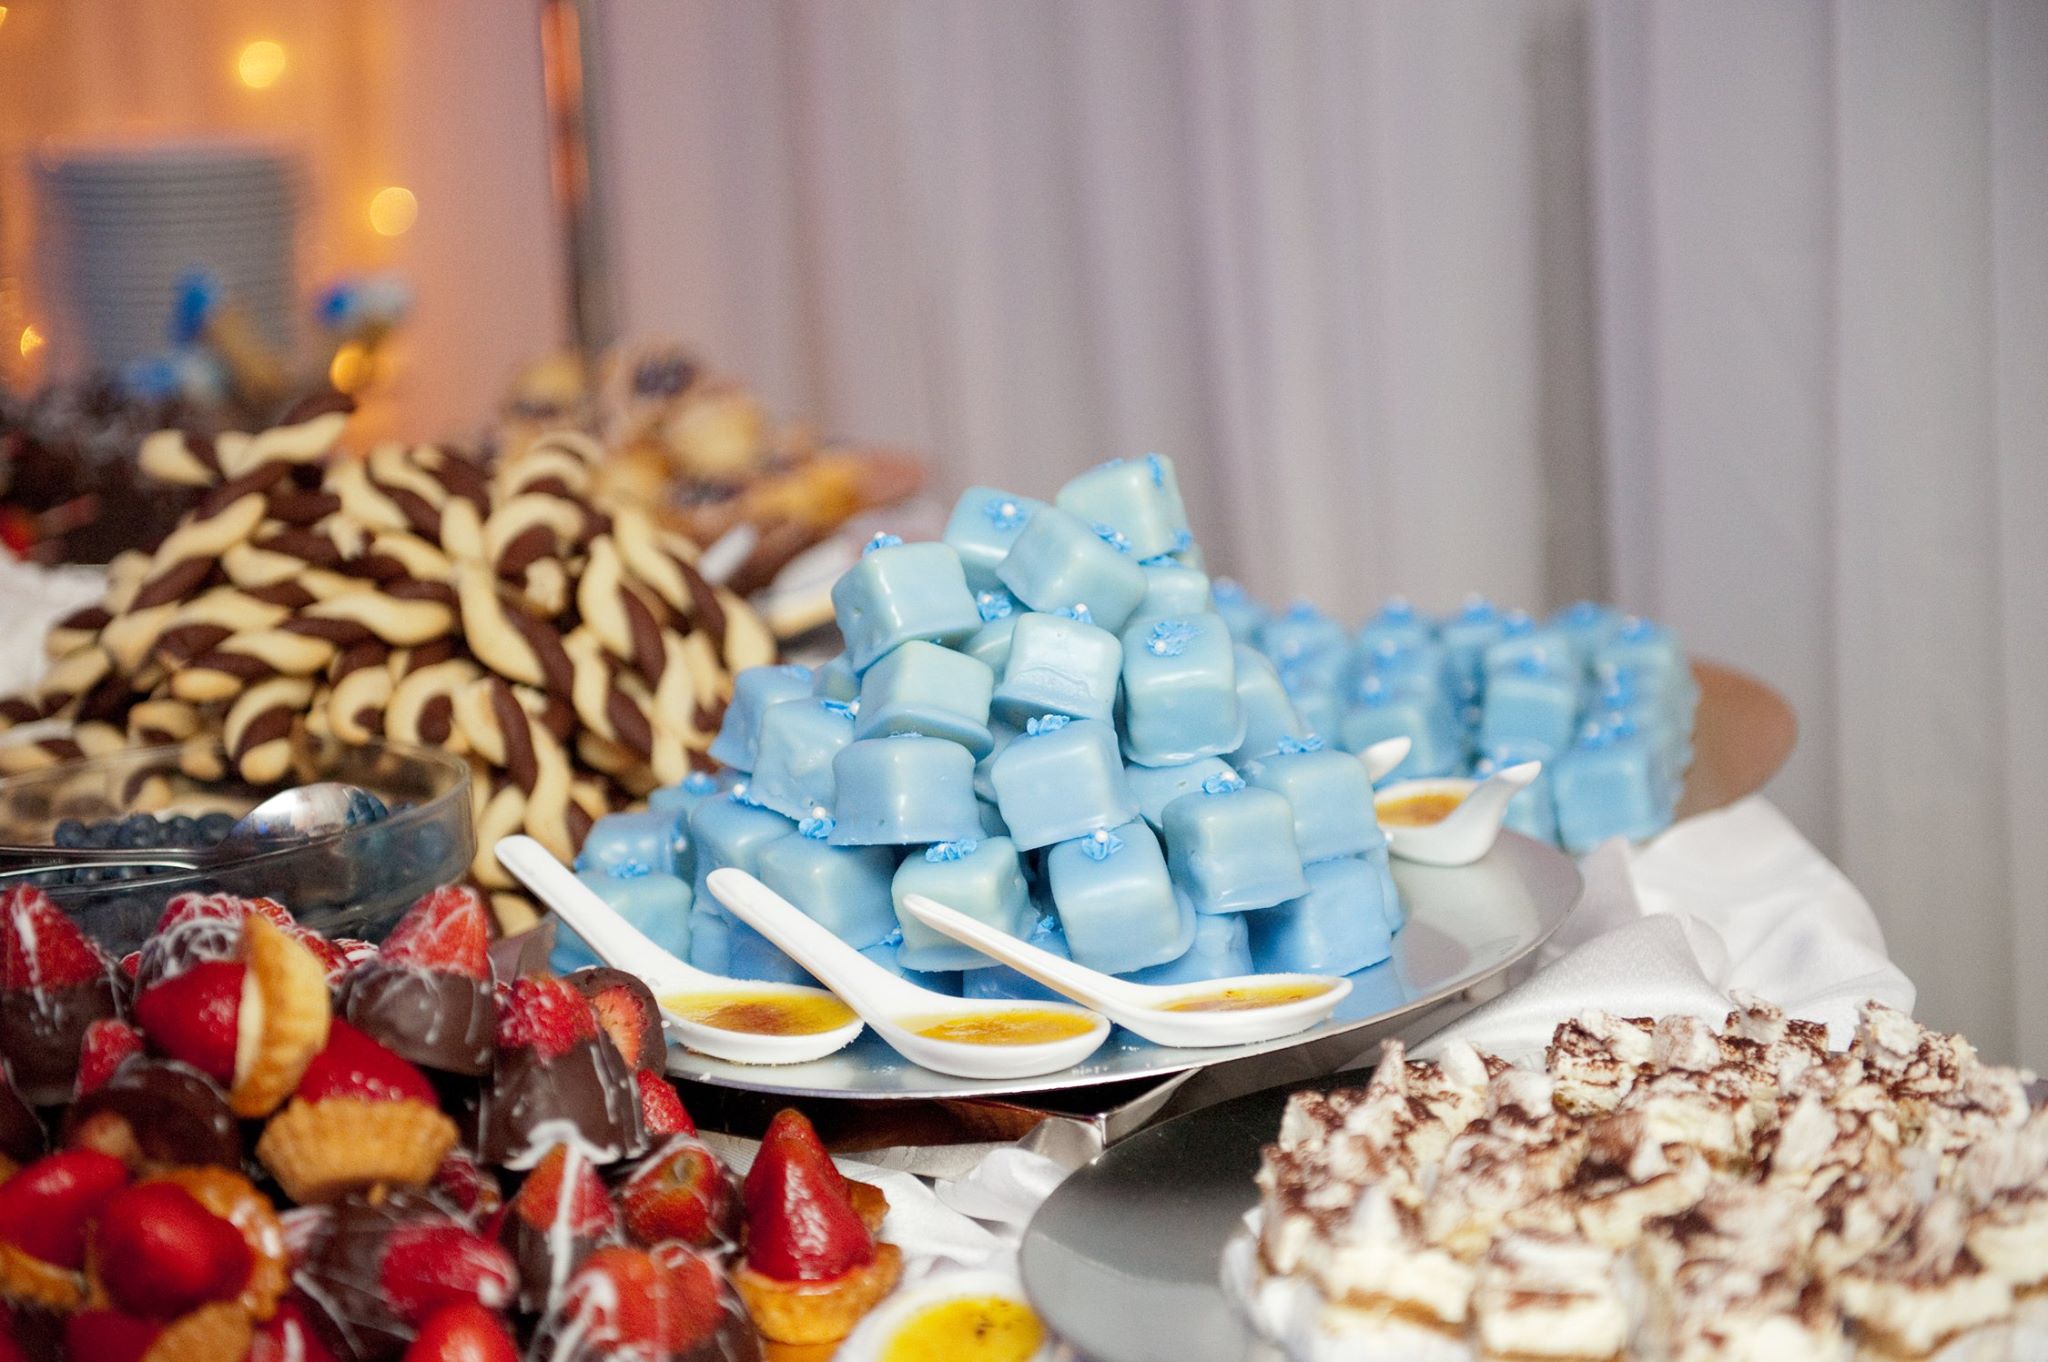 Dessert Table with Pastries